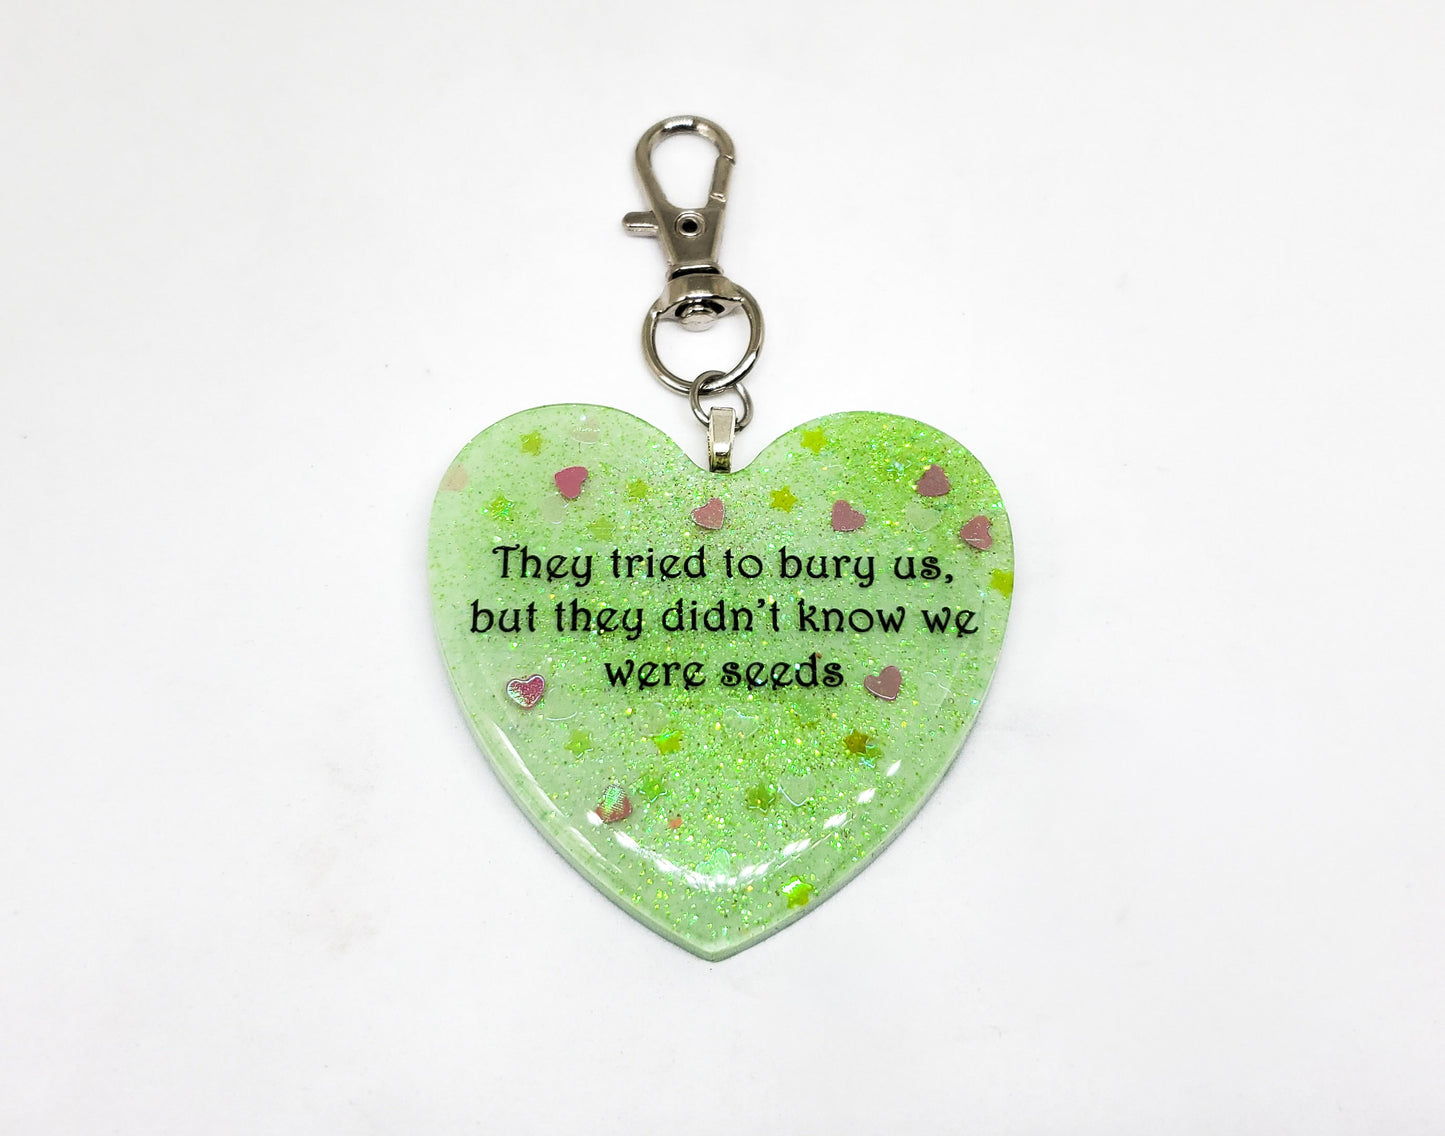 They tried to bury us, but they didn't know we were seeds heart keychain